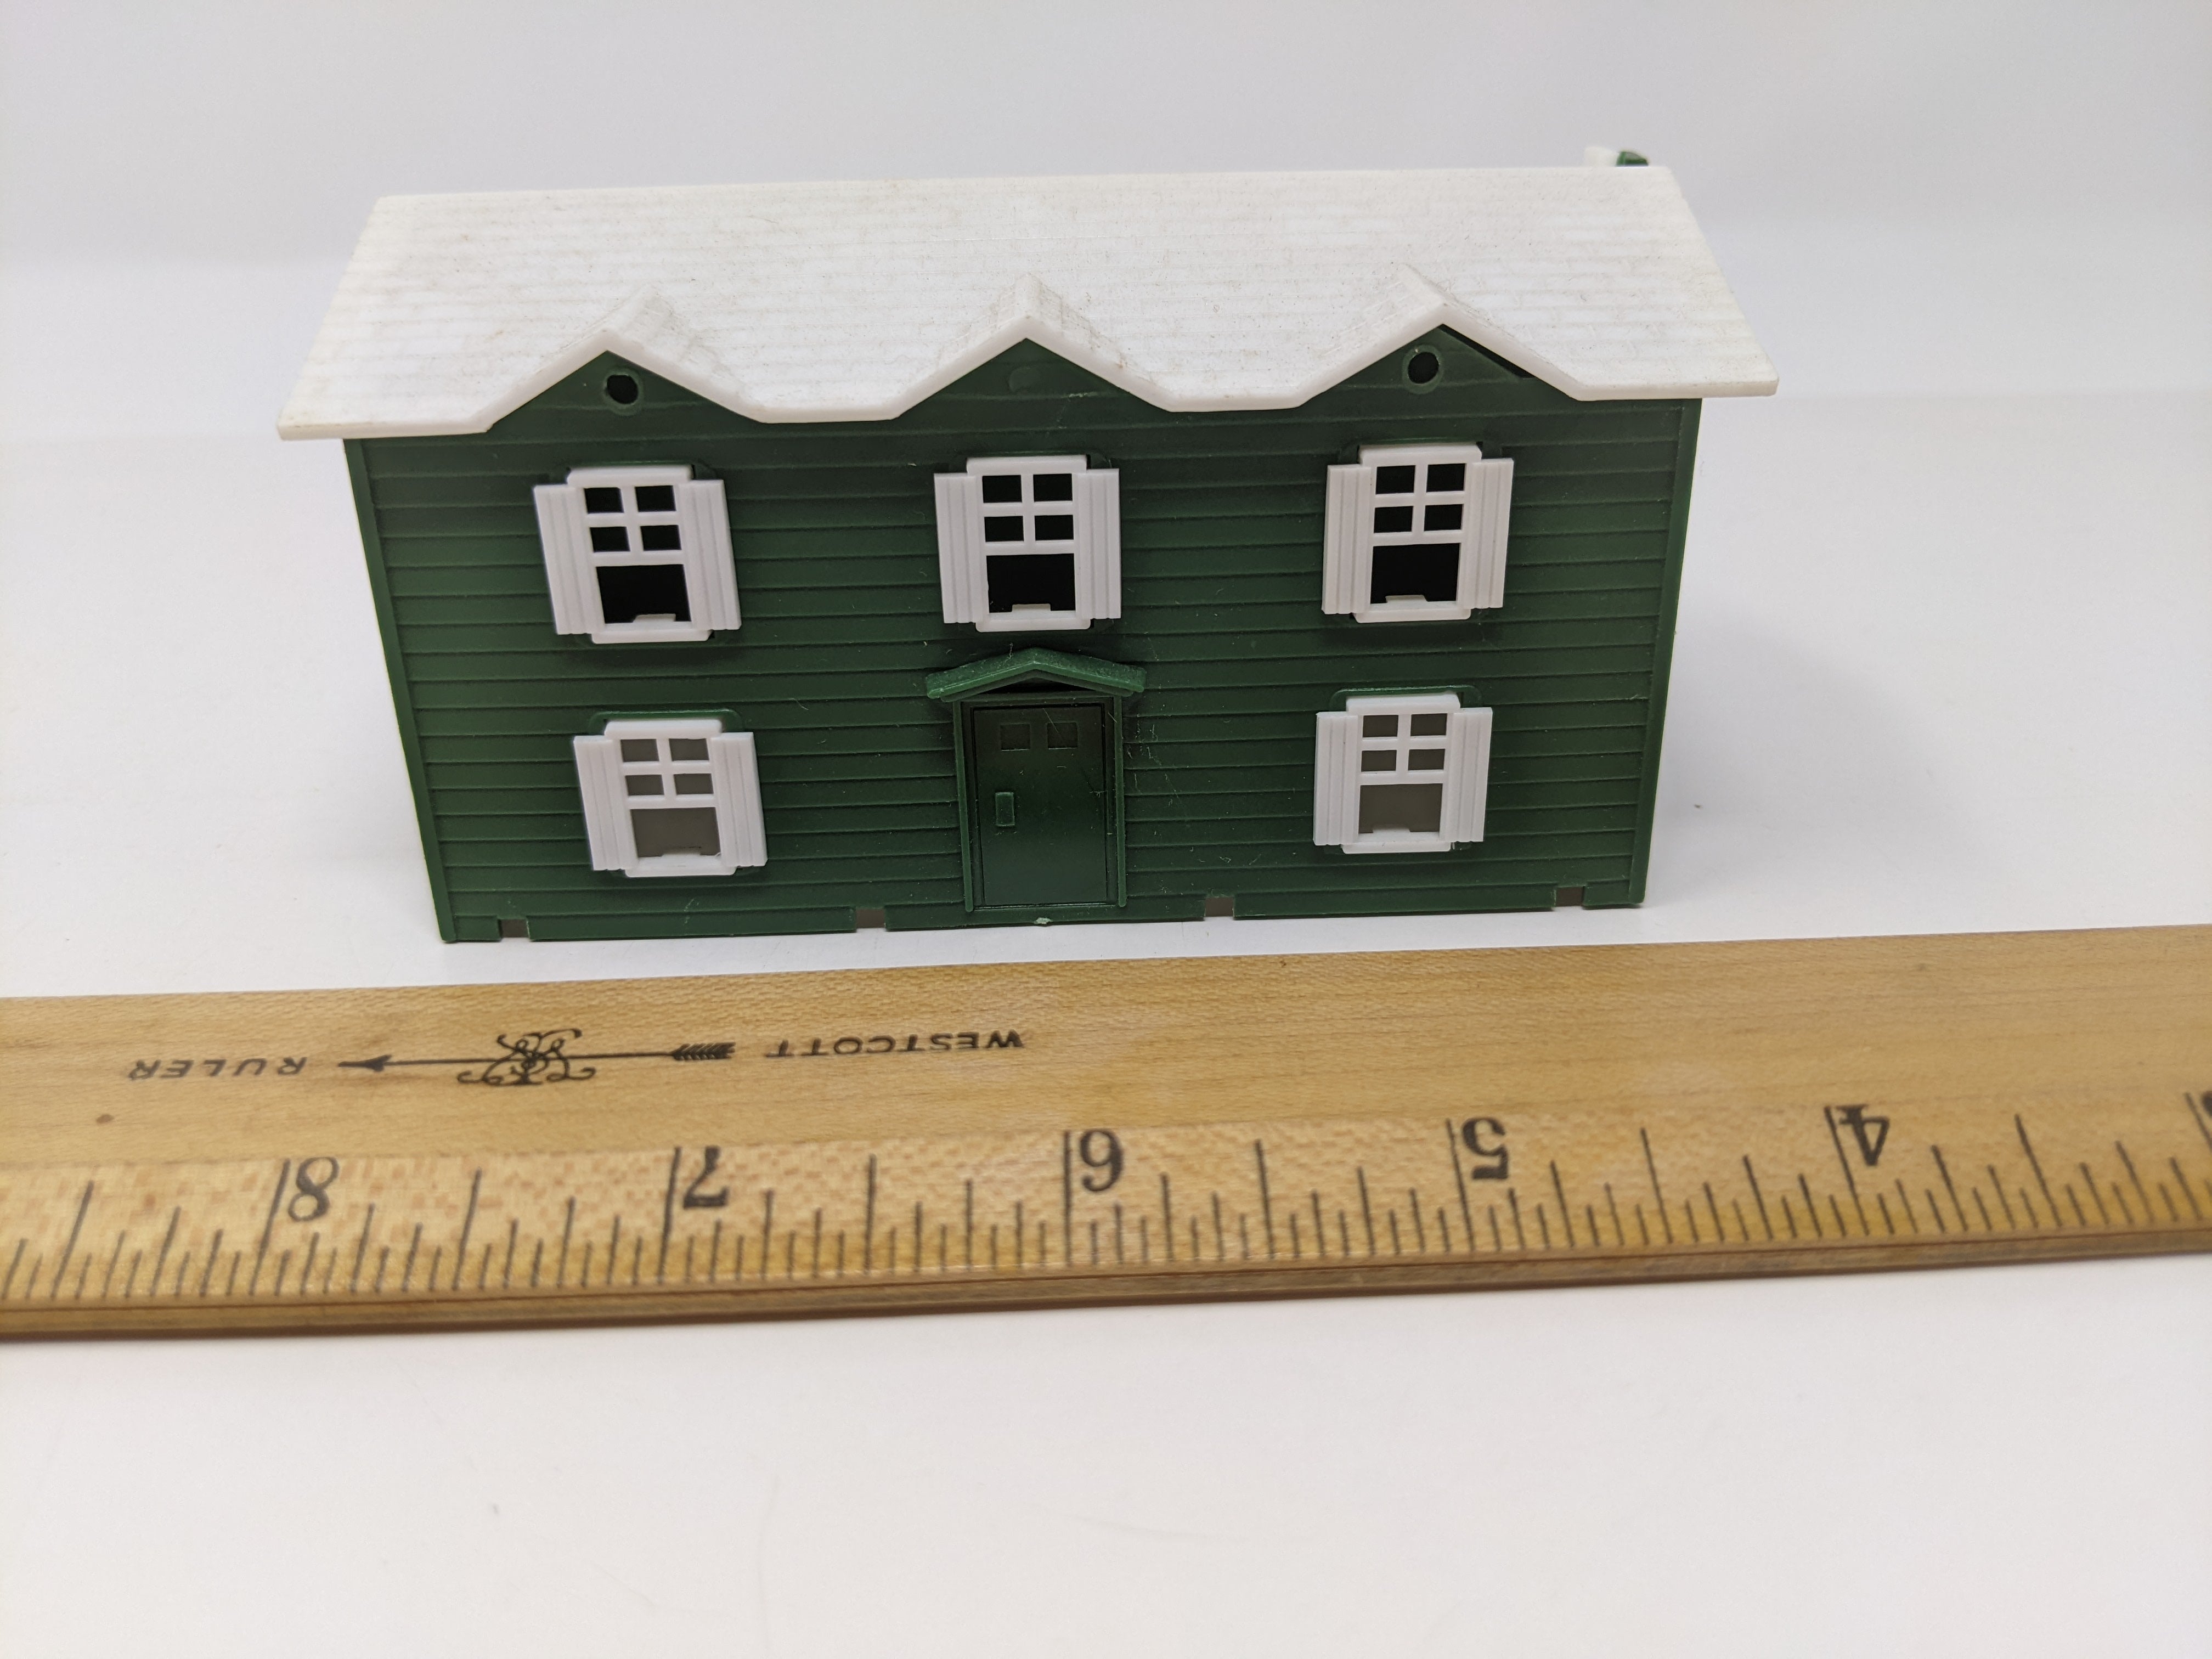 USED HO Scale, Small Green House, Read Description